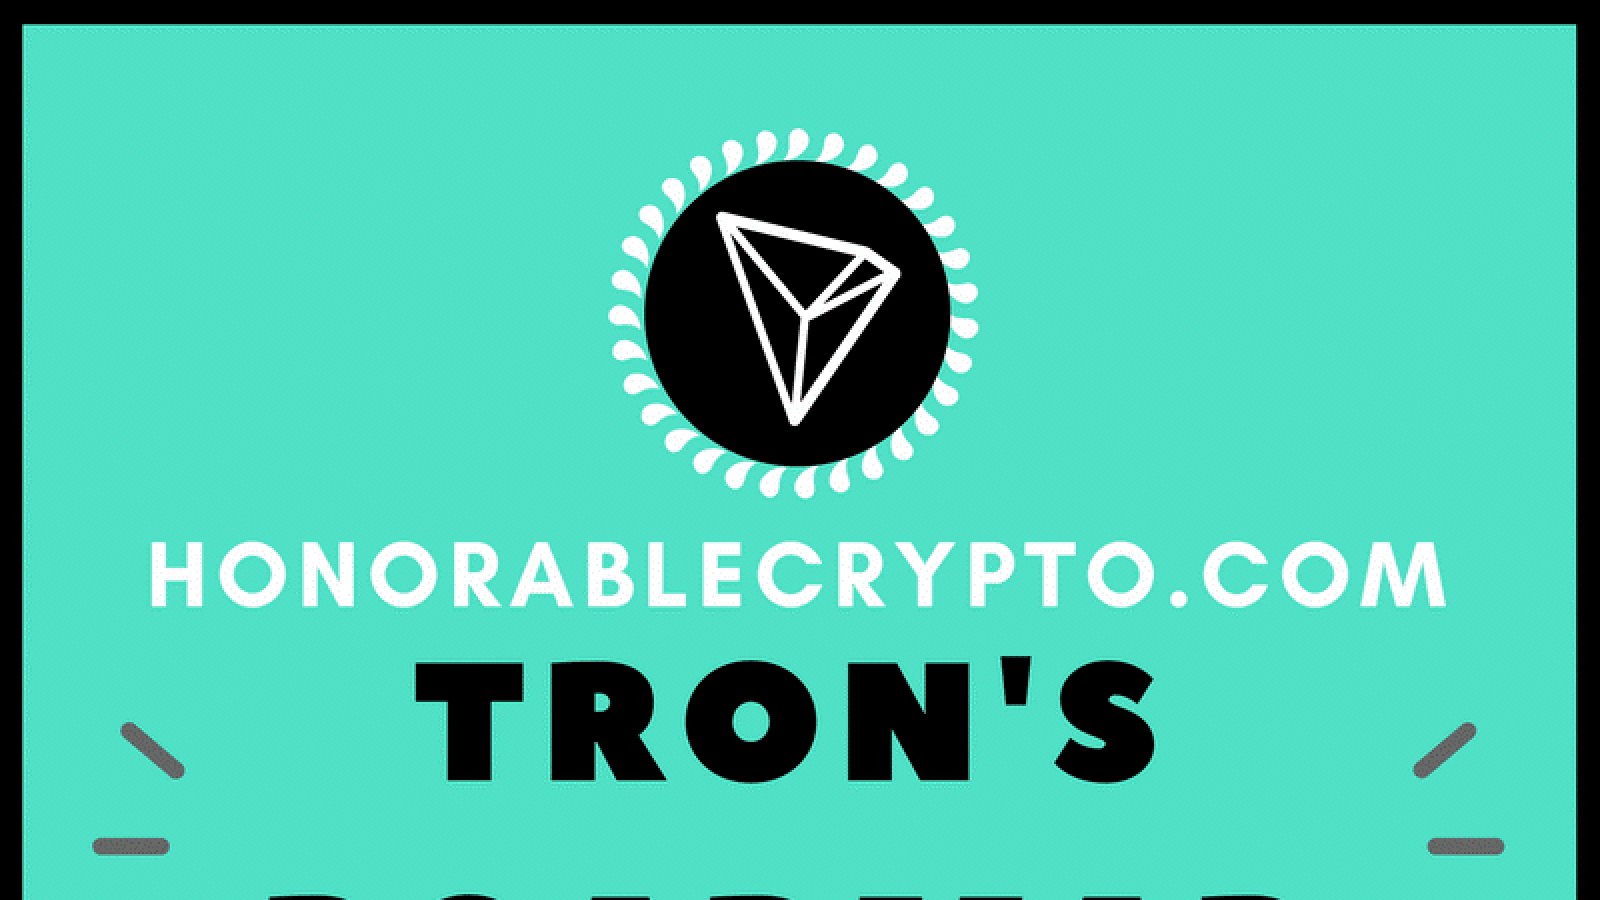 Tron coin and its various business stages